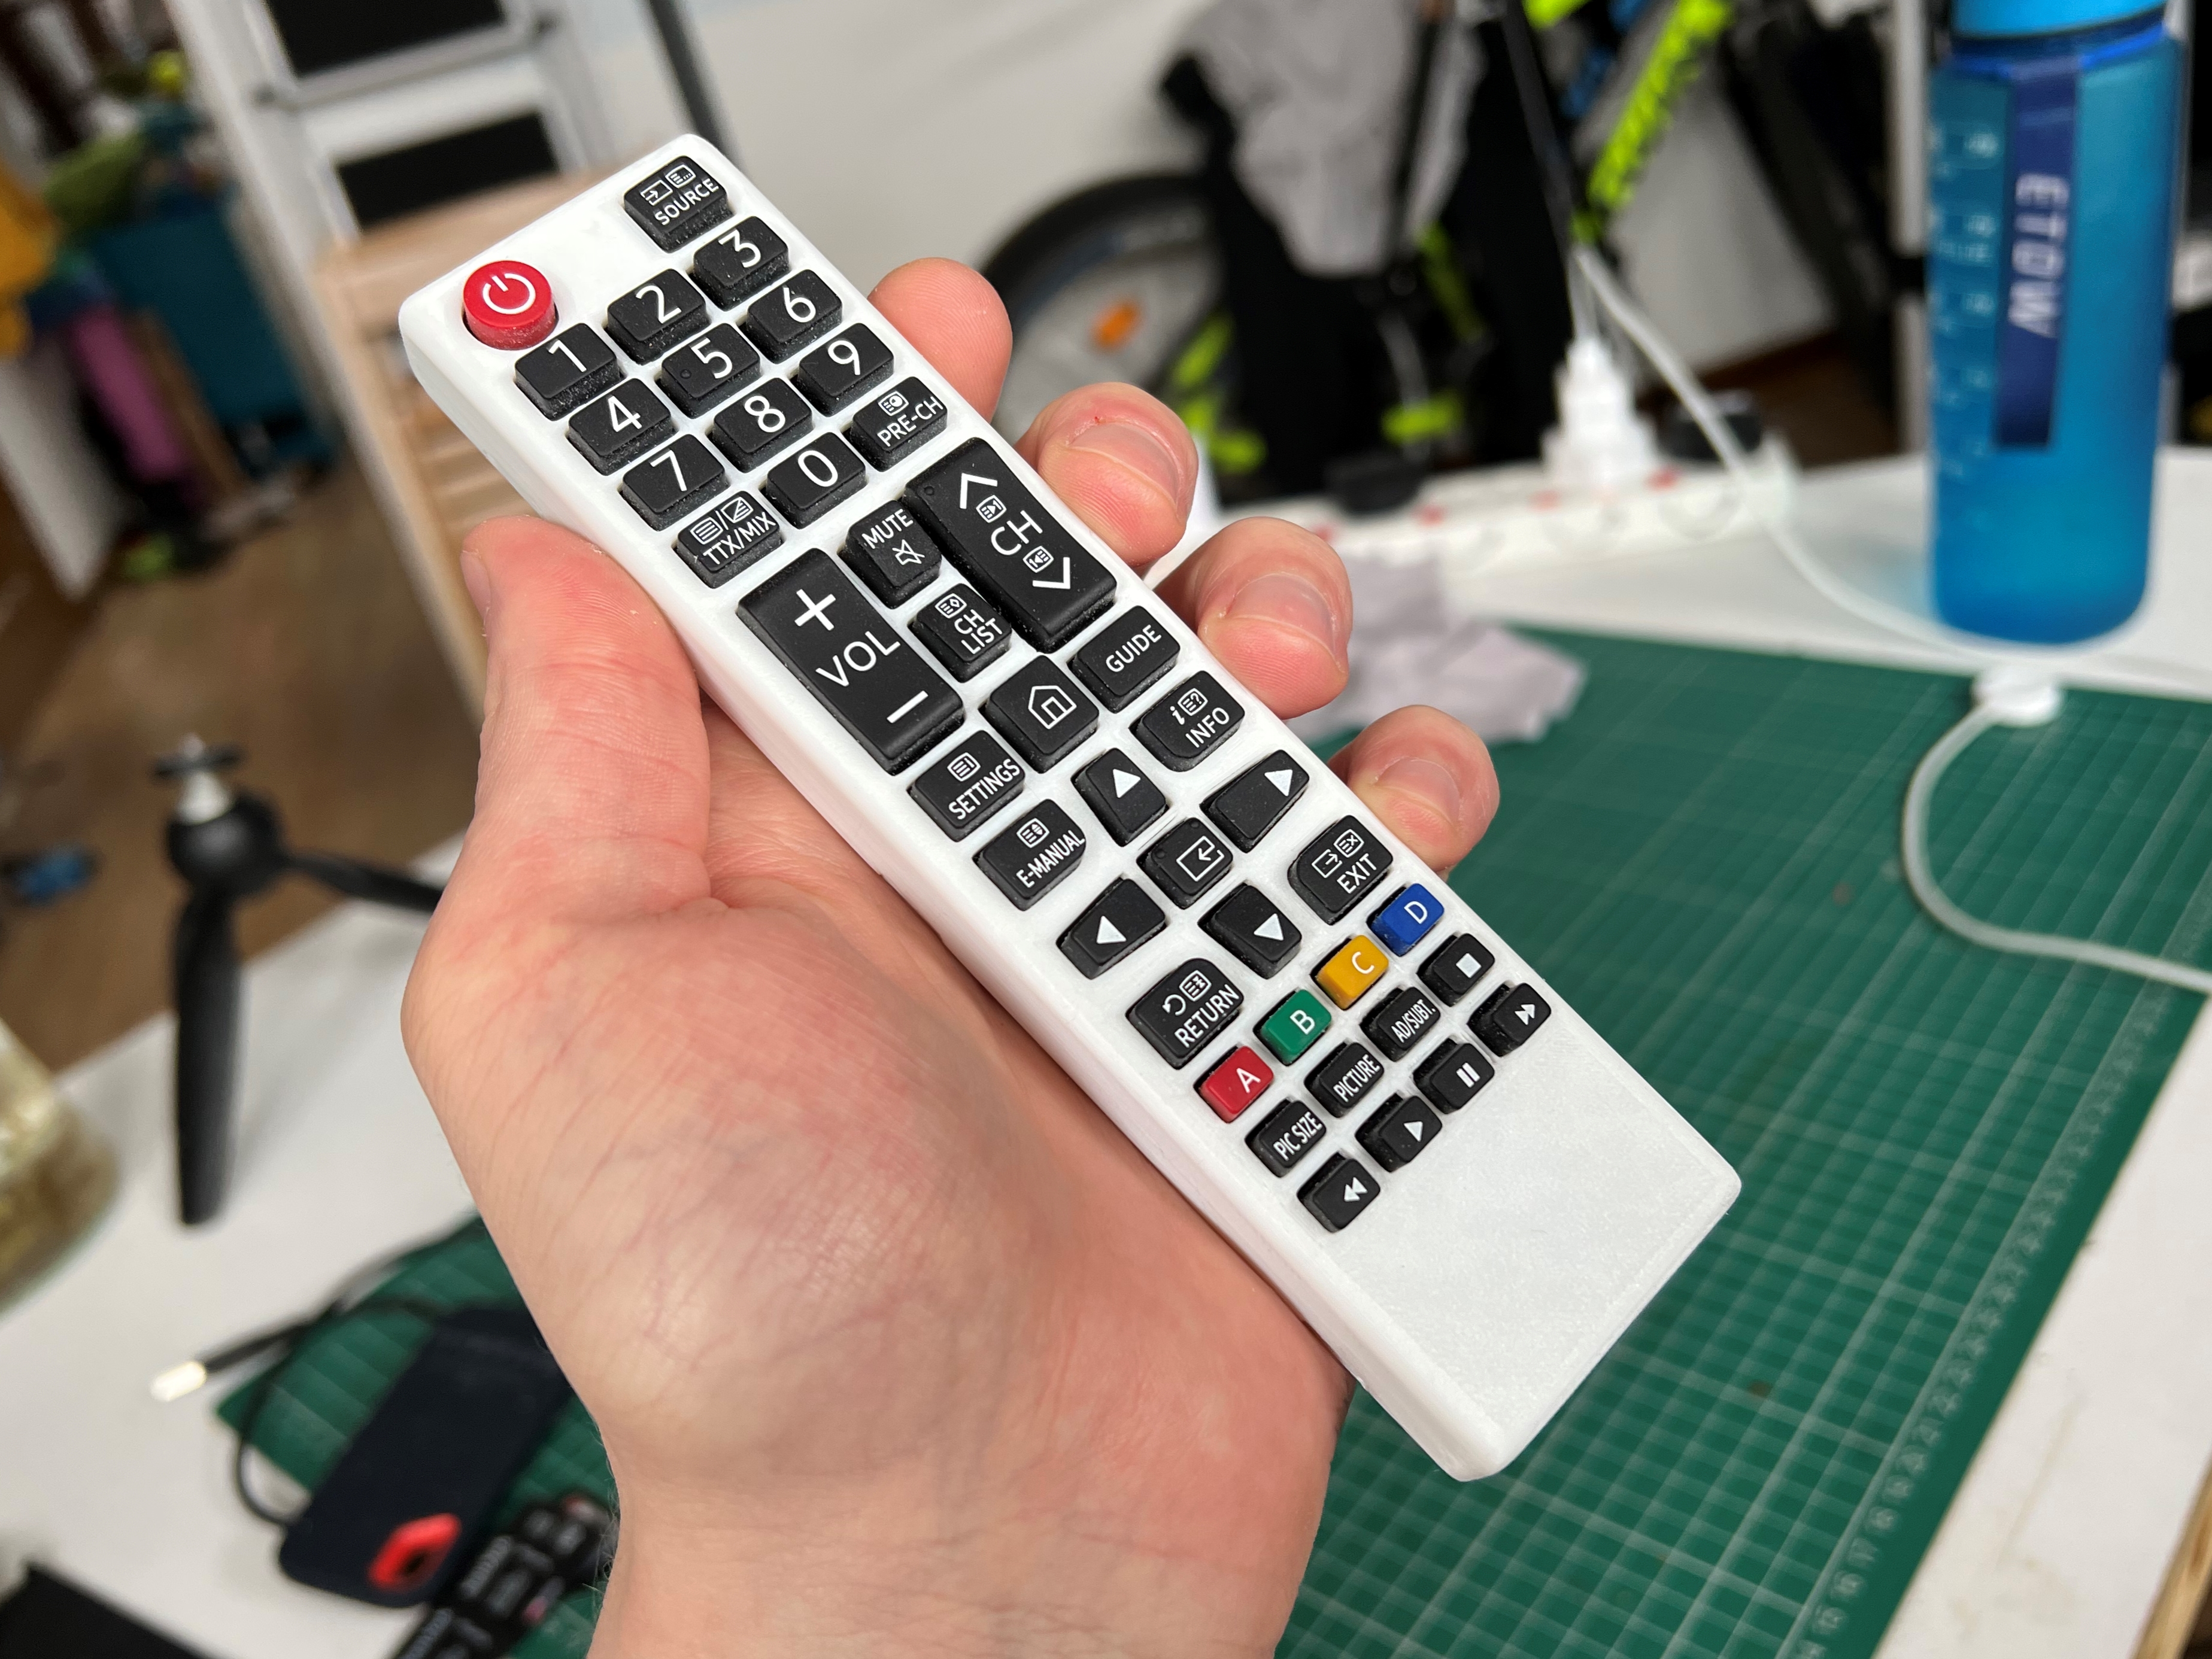 Samsung TV remote replacement case / battery mod